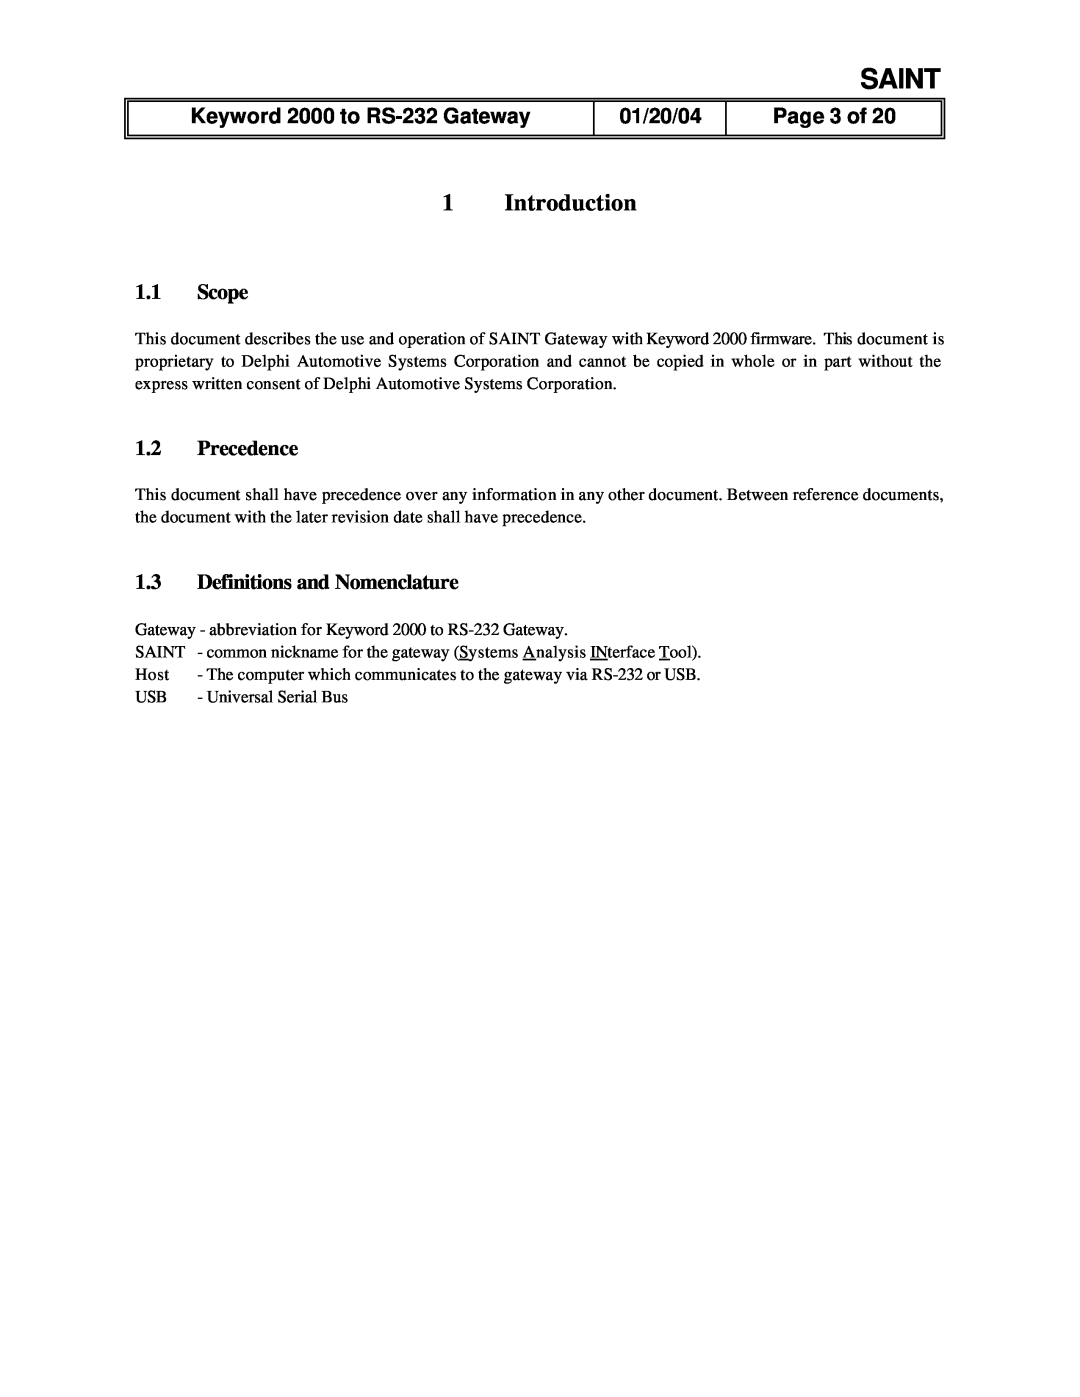 Delphi RS-232 manual Introduction, Page 3 of, 1.1Scope, 1.2Precedence, 1.3Definitions and Nomenclature, Saint, 01/20/04 